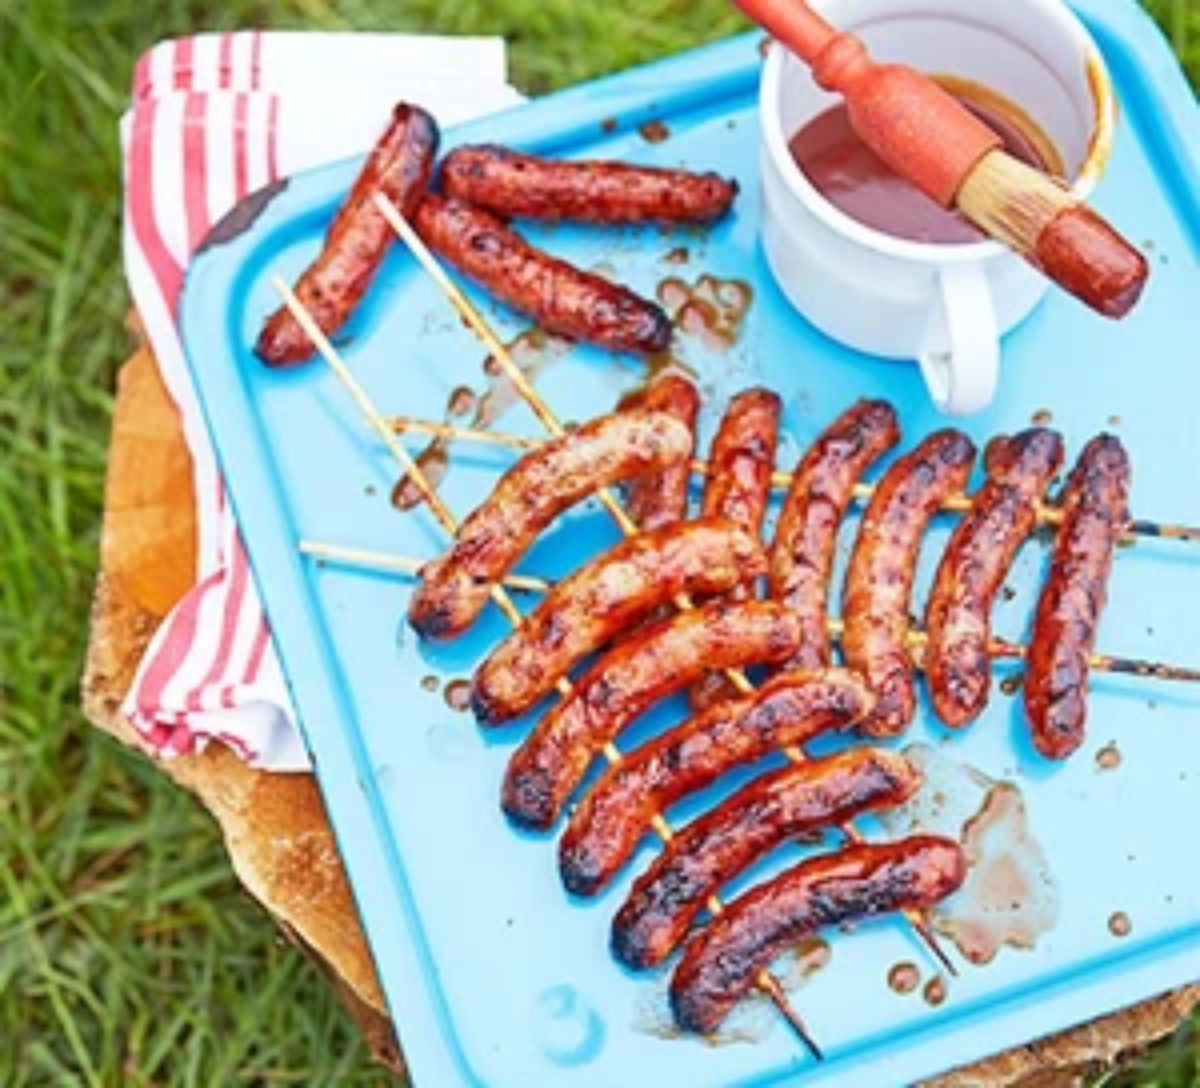 Bbq sausages with smoky tomato sauce on a blue tray.